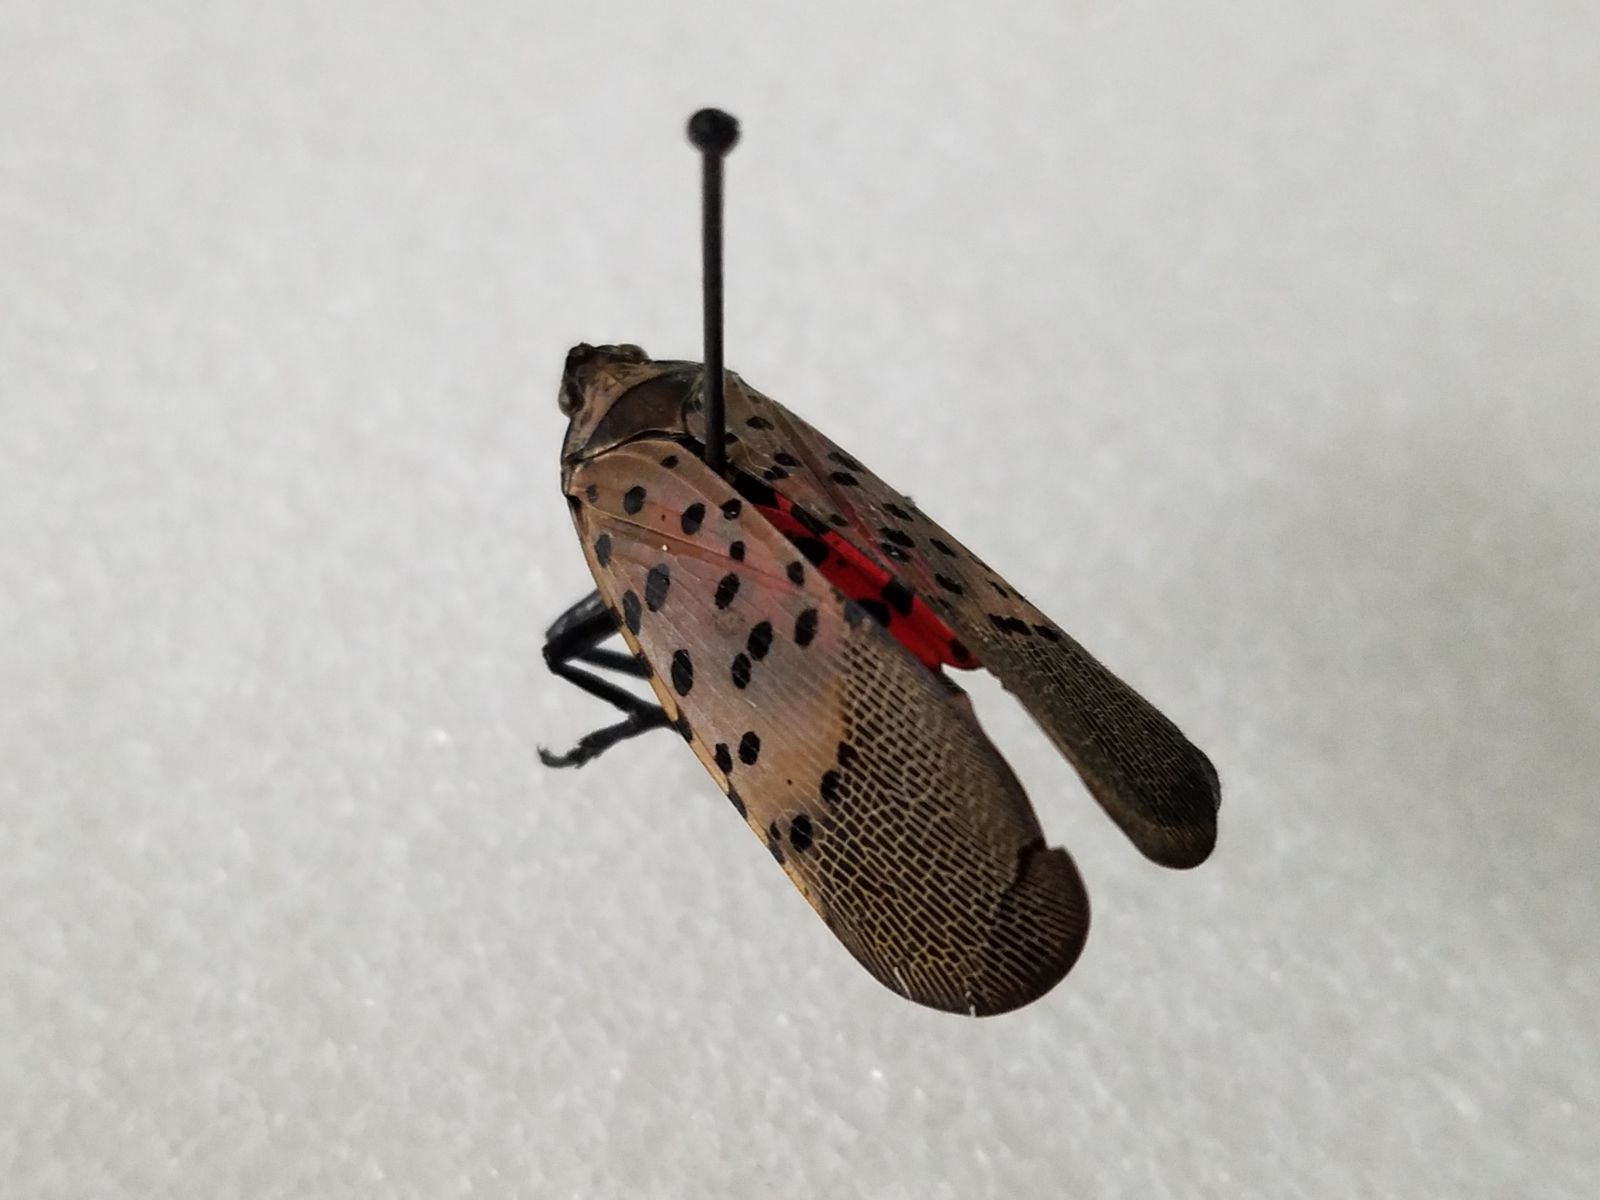 adult spotted lanternfly with brown wings and black spots